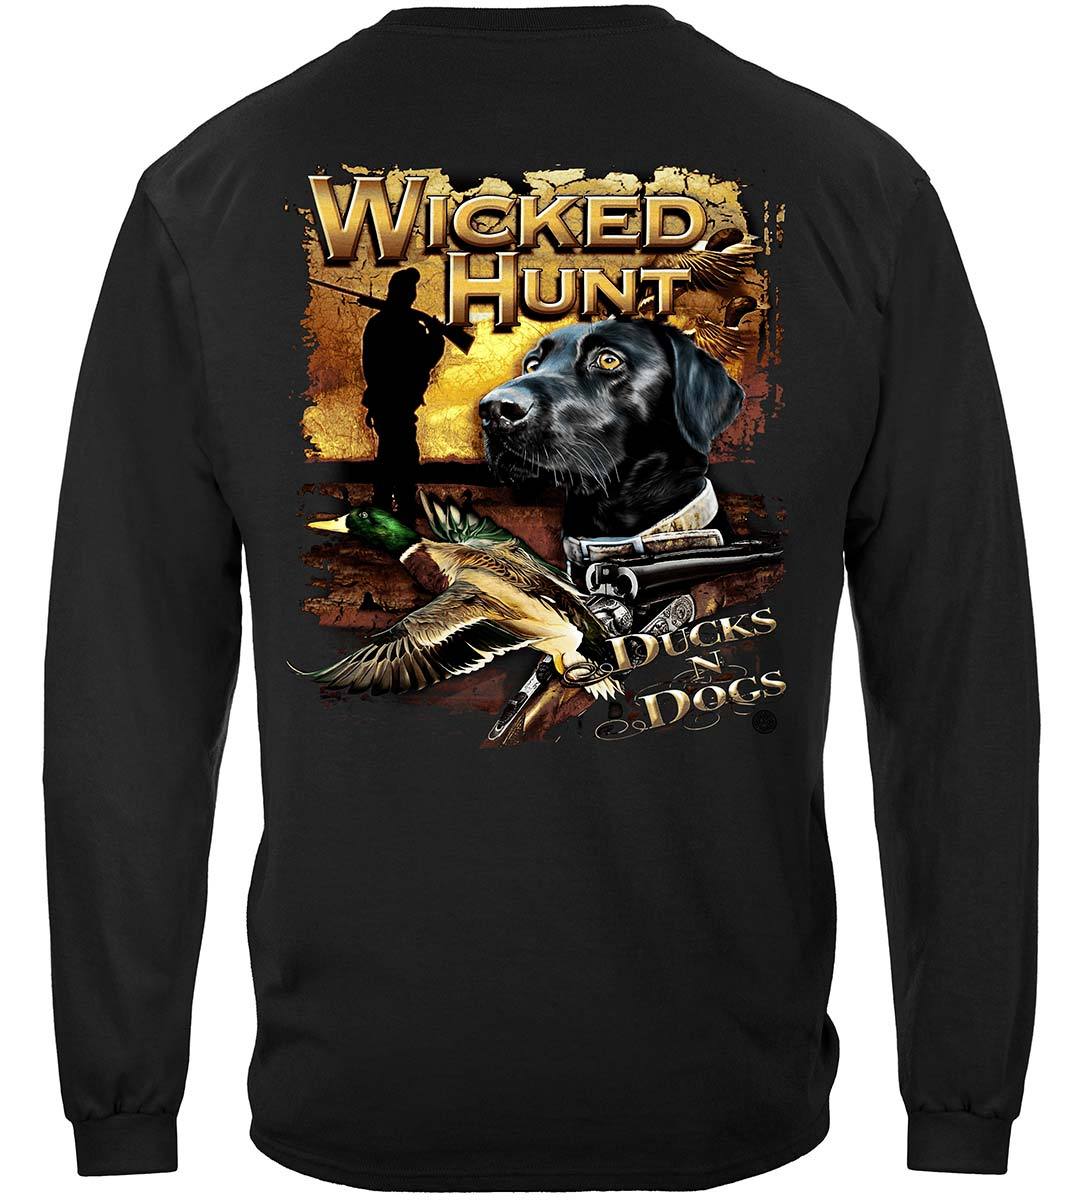 Wicked Hunt Ducks And Dogs Premium Long Sleeves